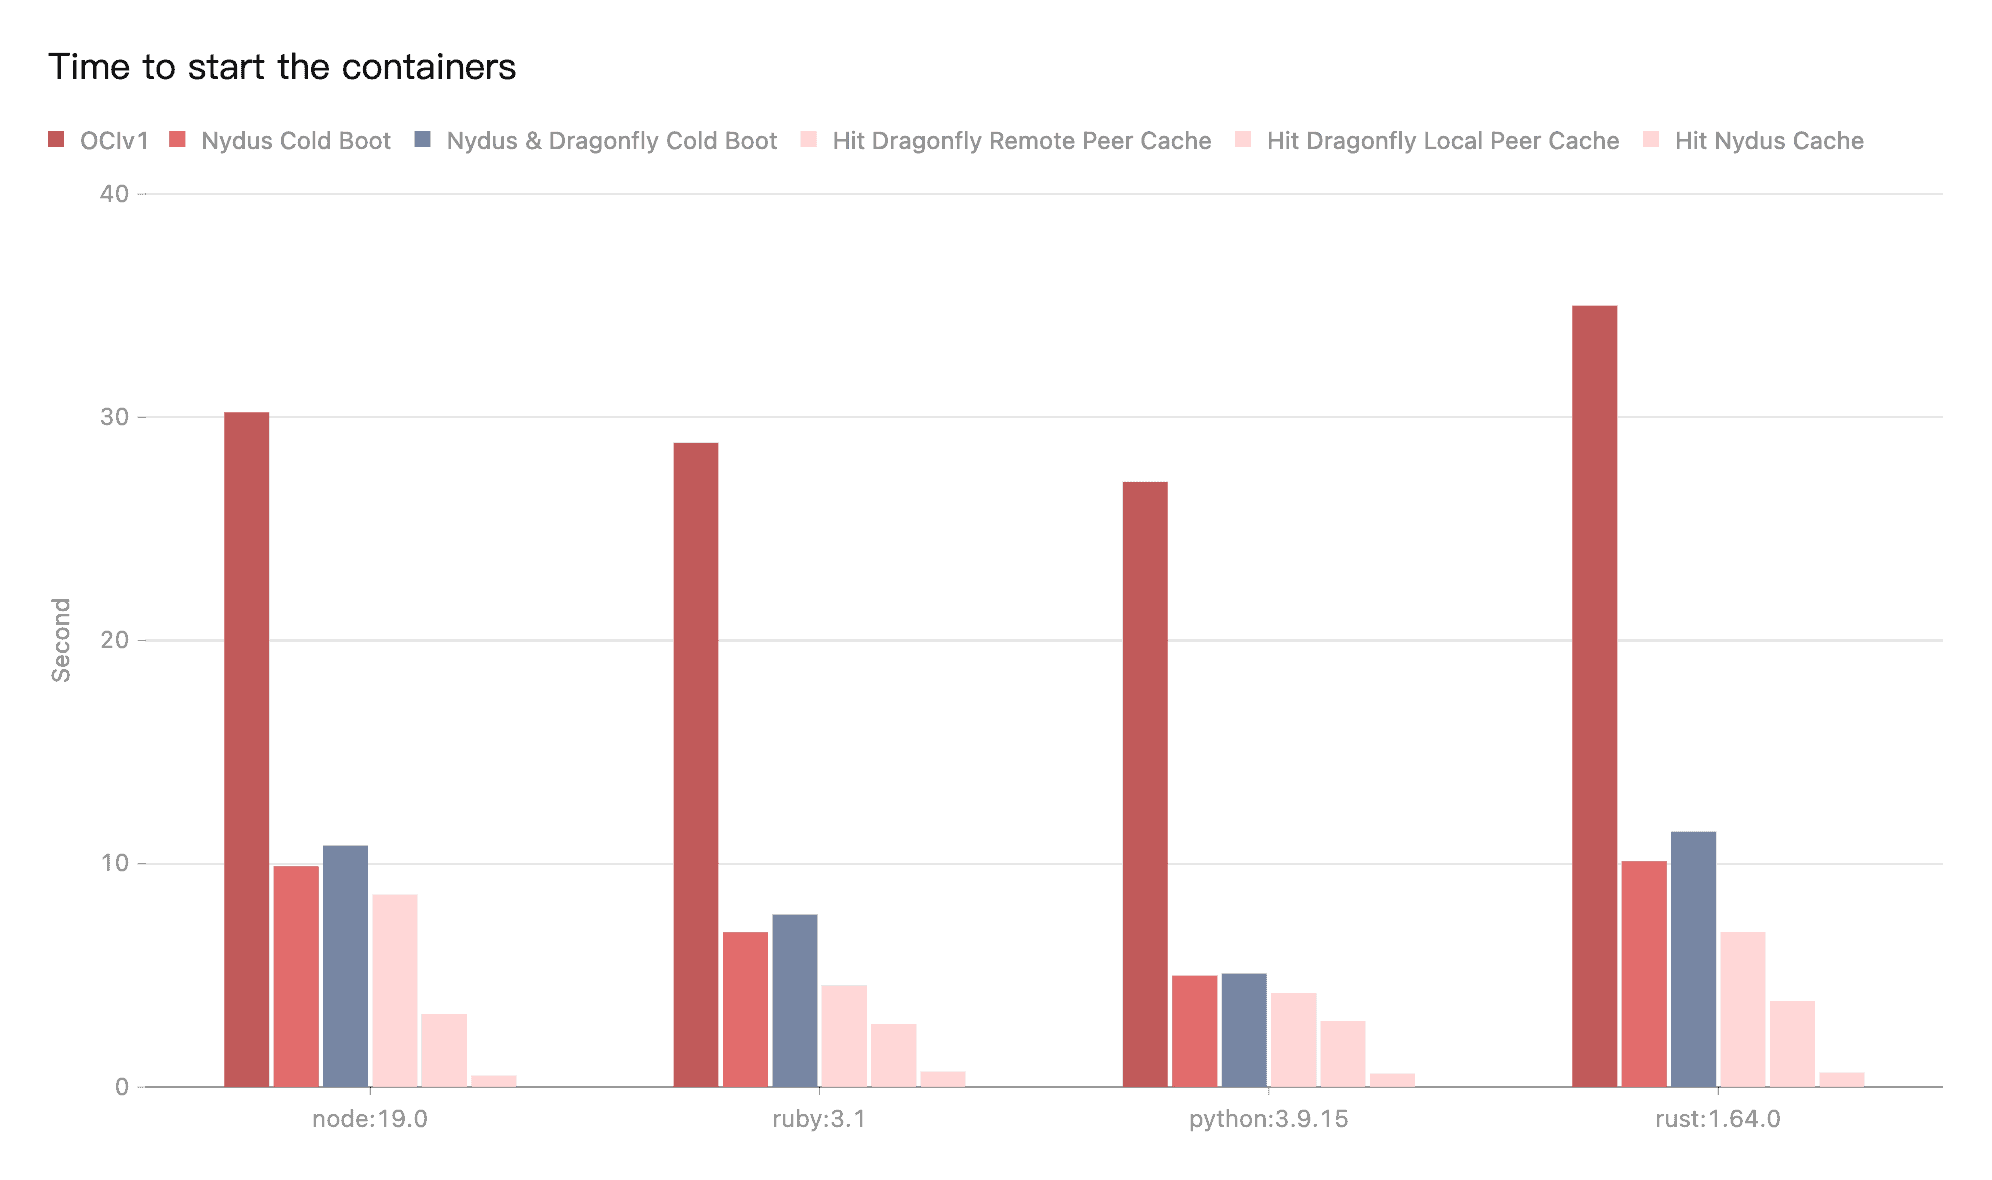 Bar chart showing time to start the containers within seconds in node:19.0, ruby:3.1, python:3.9.15, rust:1.64.0